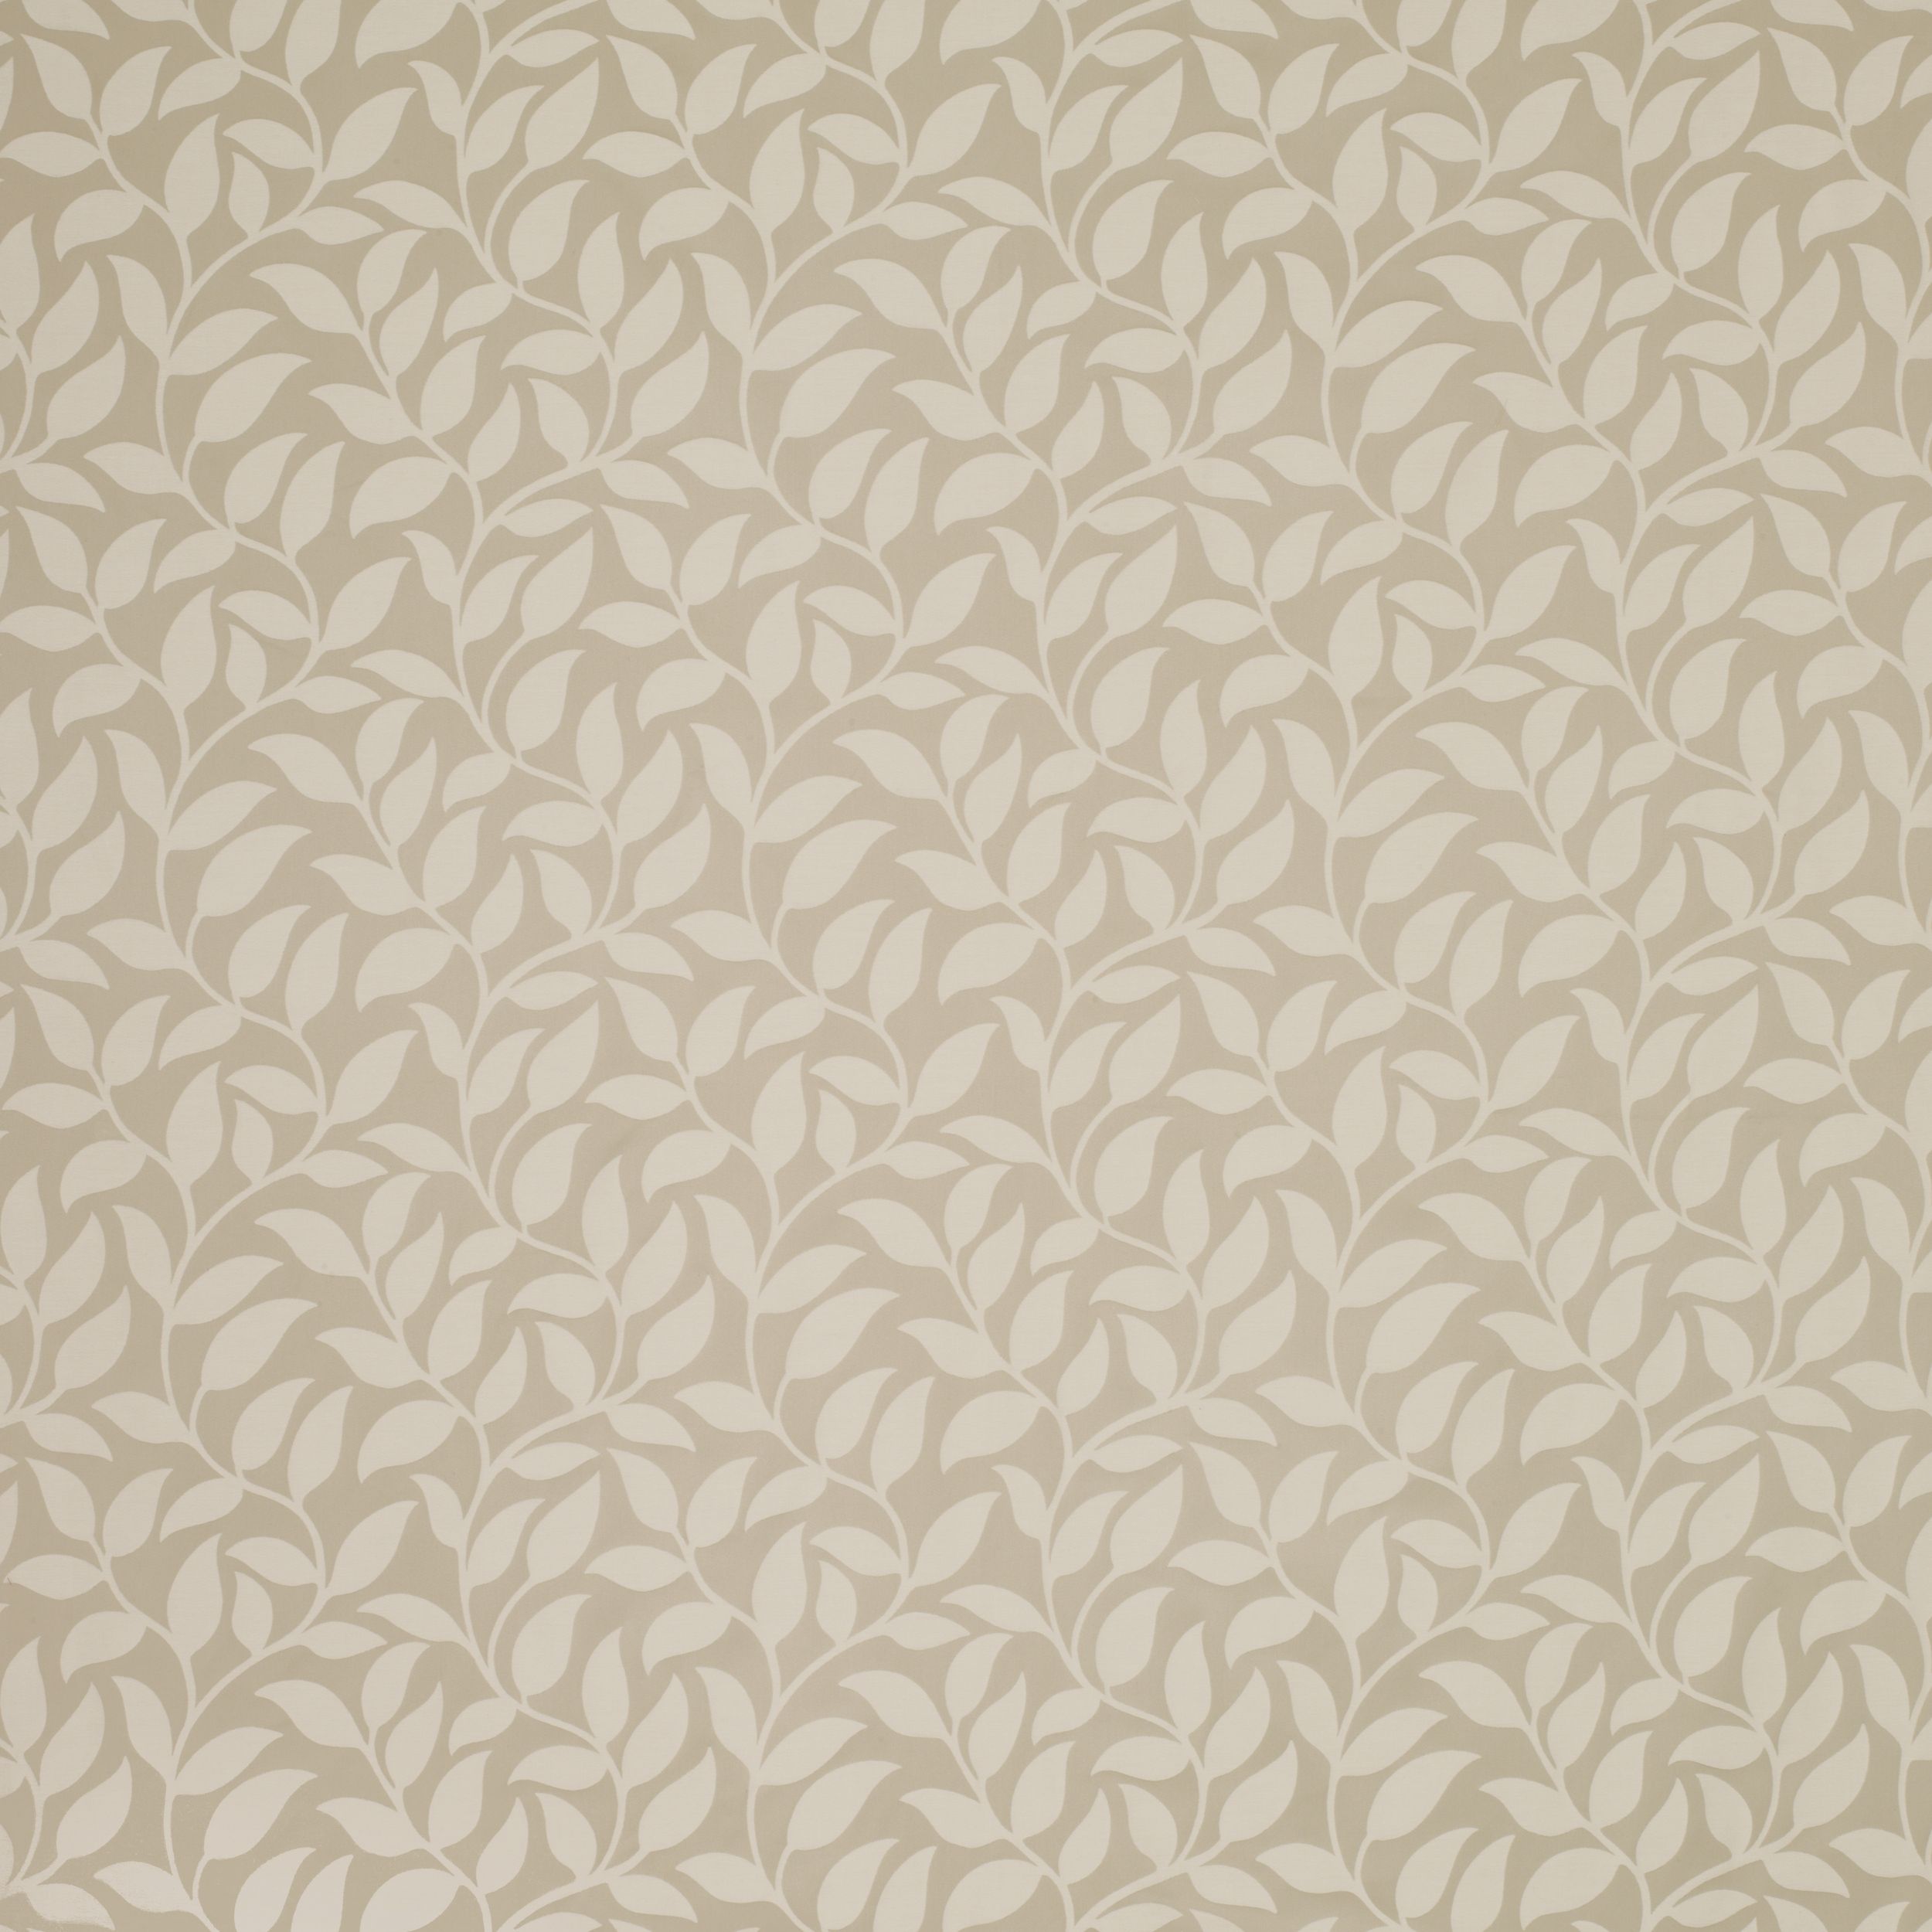 Poplar Natural Cotton Curtain Fabric Curtain Fabrics Pinterest Throughout Natural Fabric Curtain (View 14 of 15)